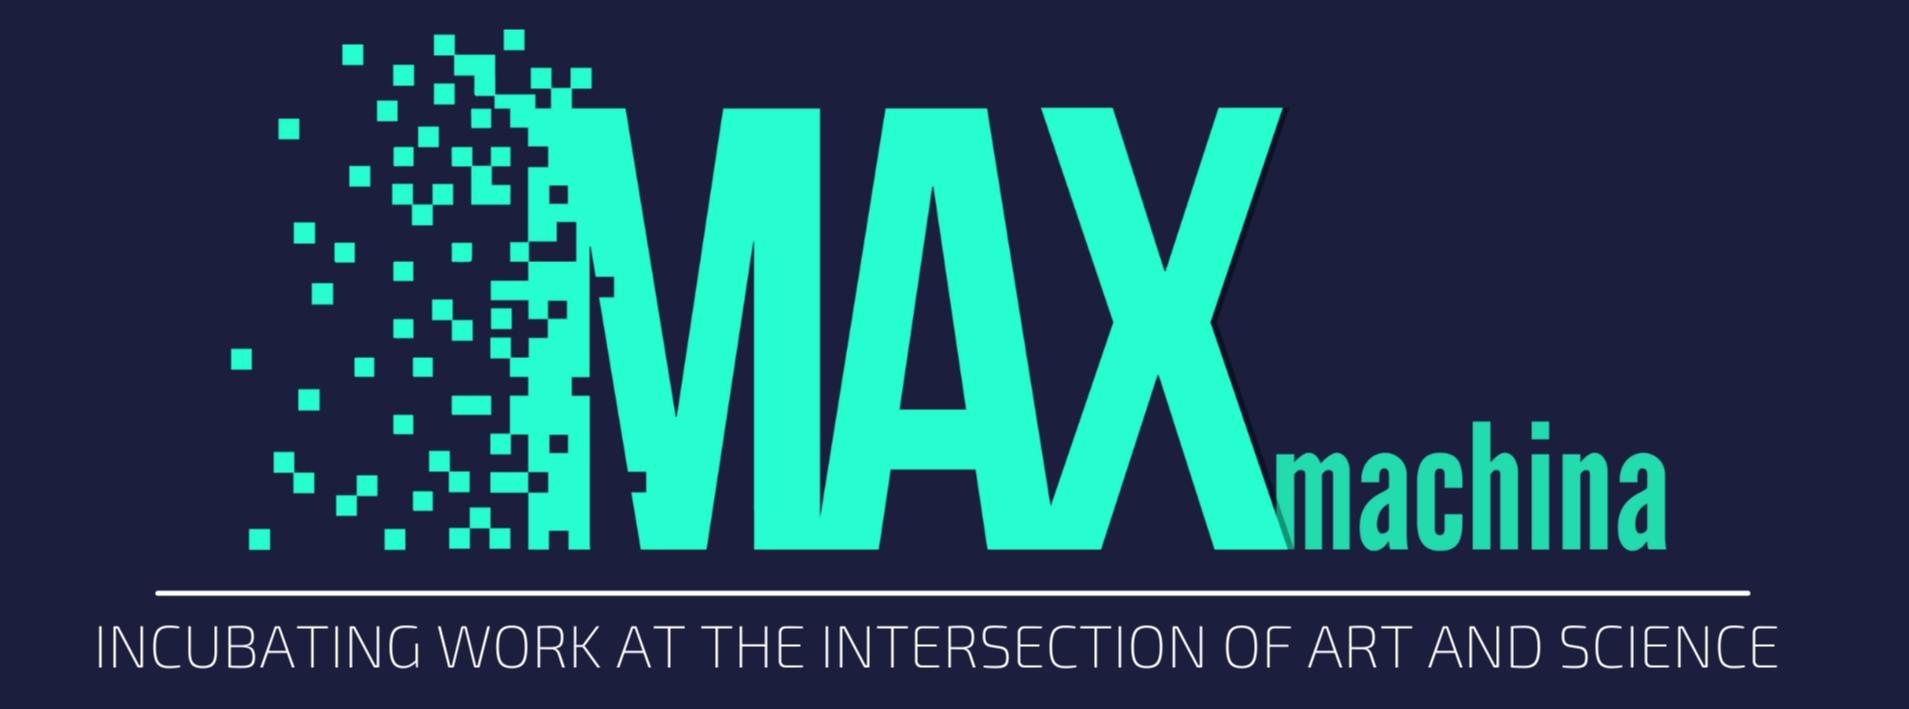 MAXmachina Logo, "INCUBATING WORK AT THE INTERSECTION OF ART AND SCIENCE"